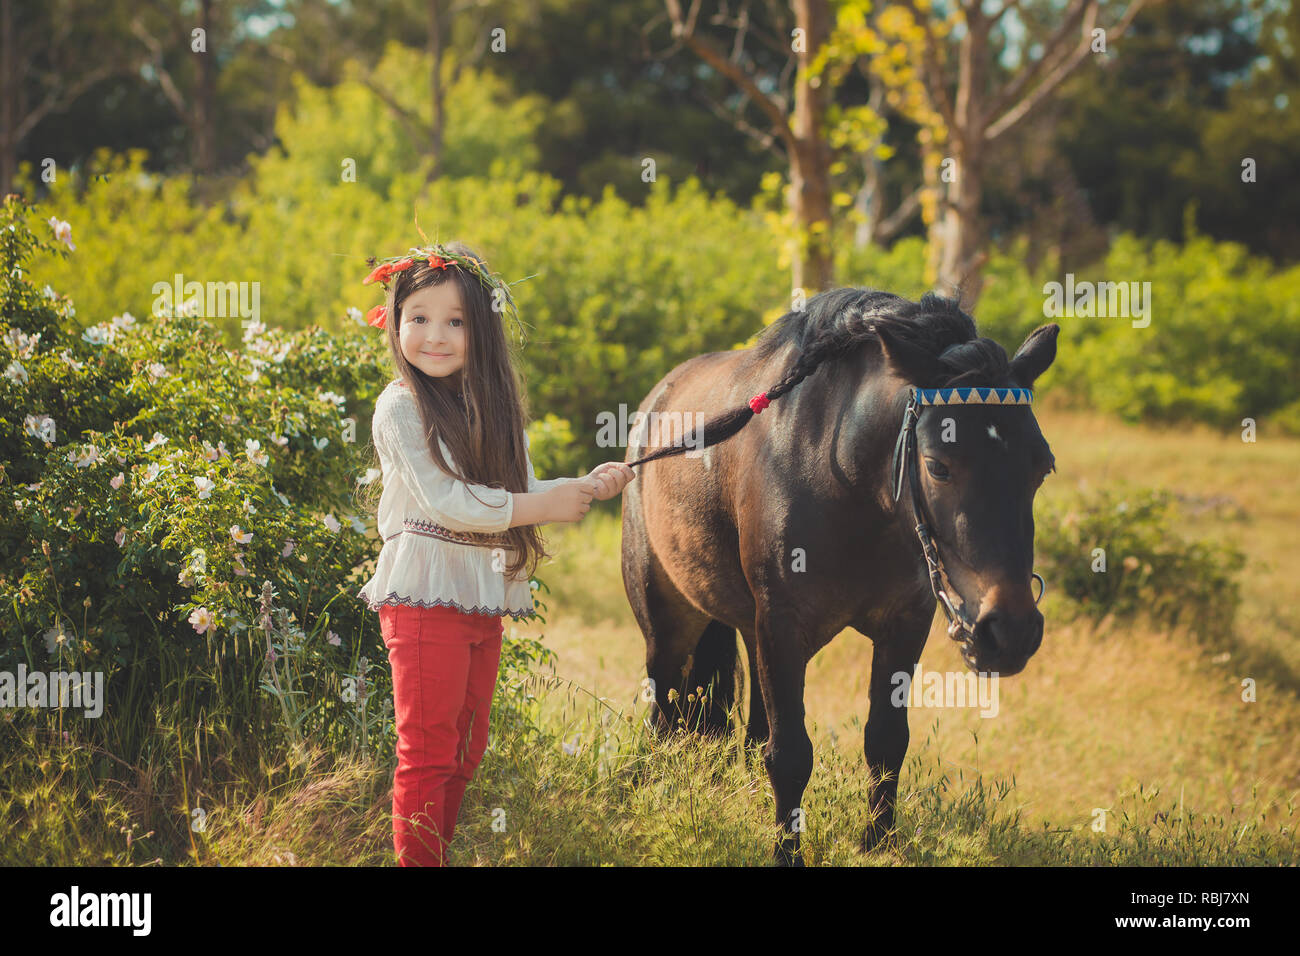 Girl with brunette hair and brown eyes stylish dressed wearing rustic village clothes white shirt and red pants on belt posing with black young horse  Stock Photo